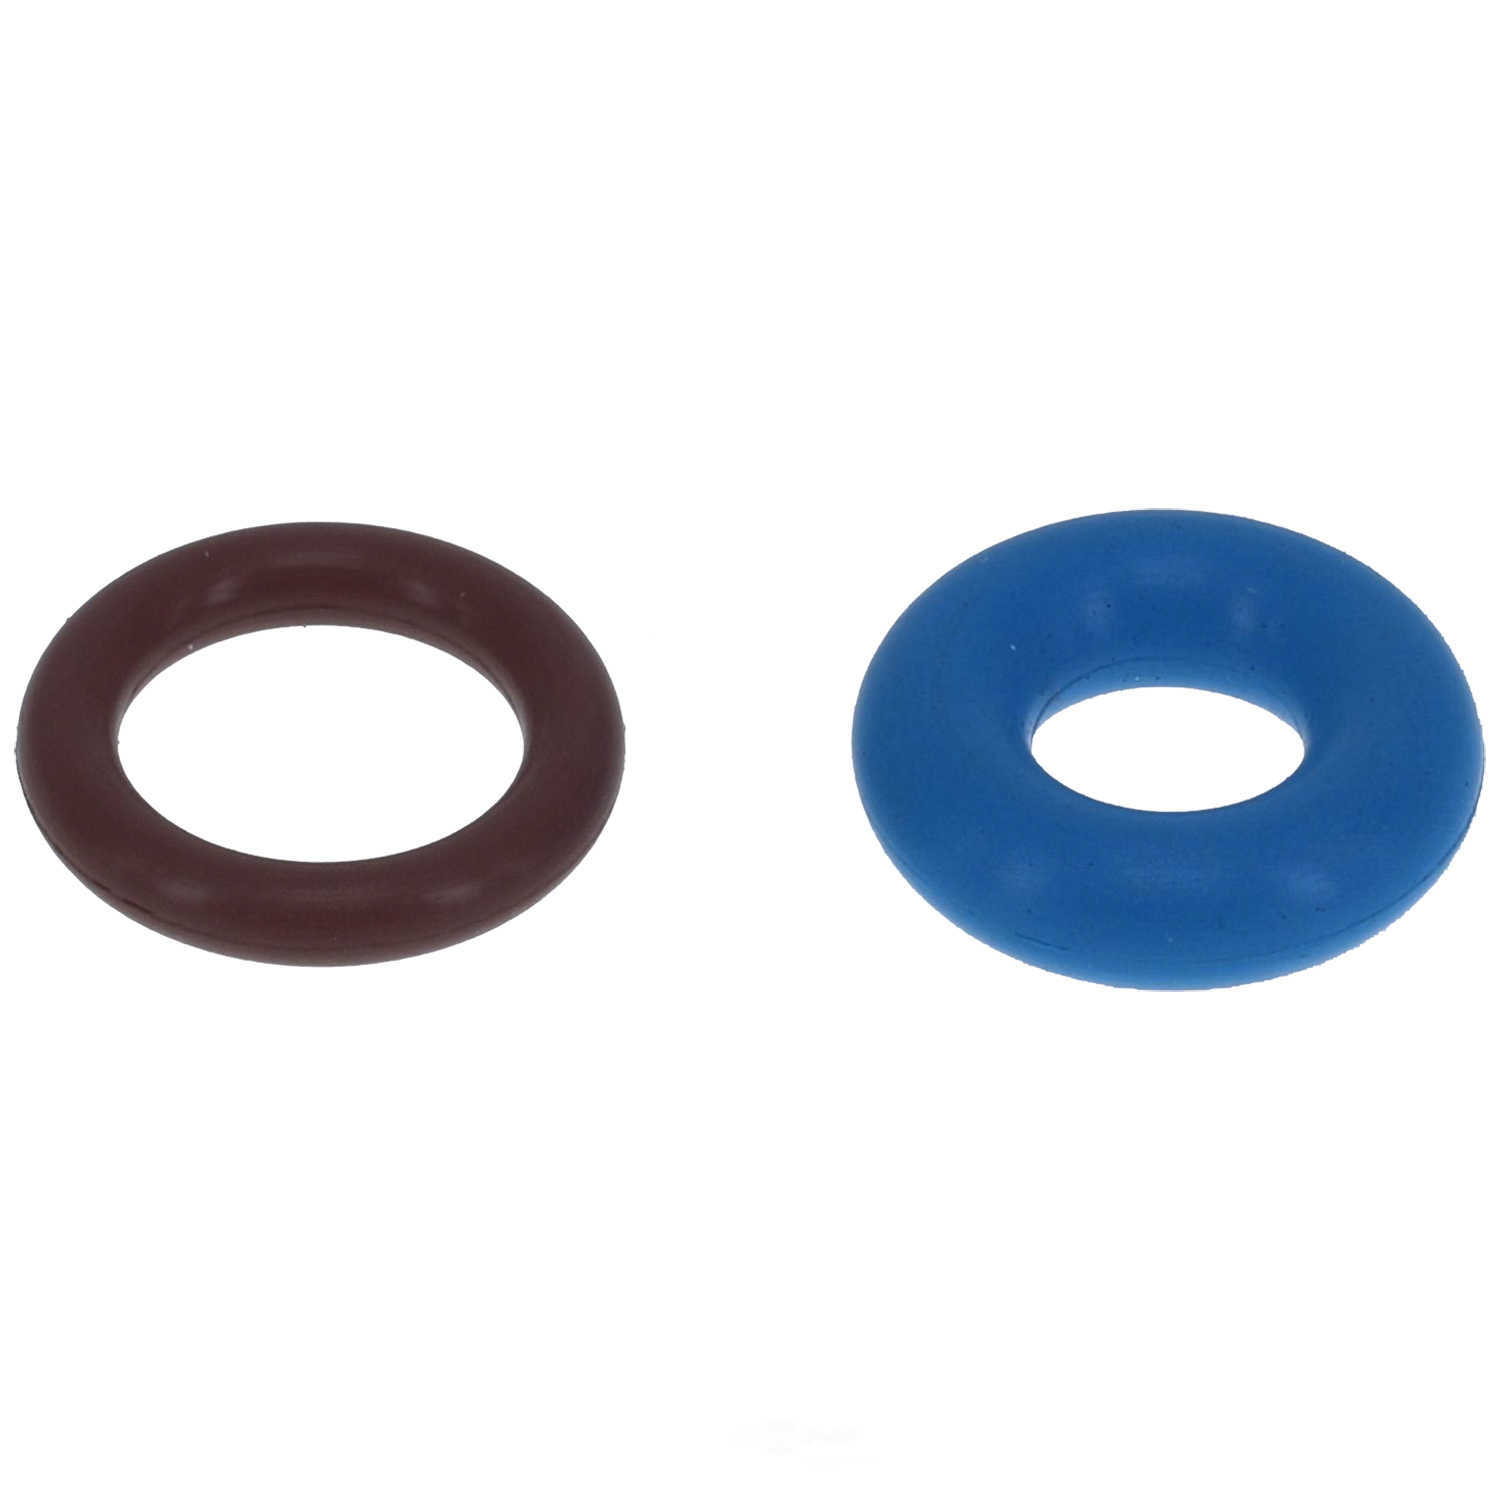 GB REMANUFACTURING INC. - Fuel Injector Seal Kit - GBR 8-053